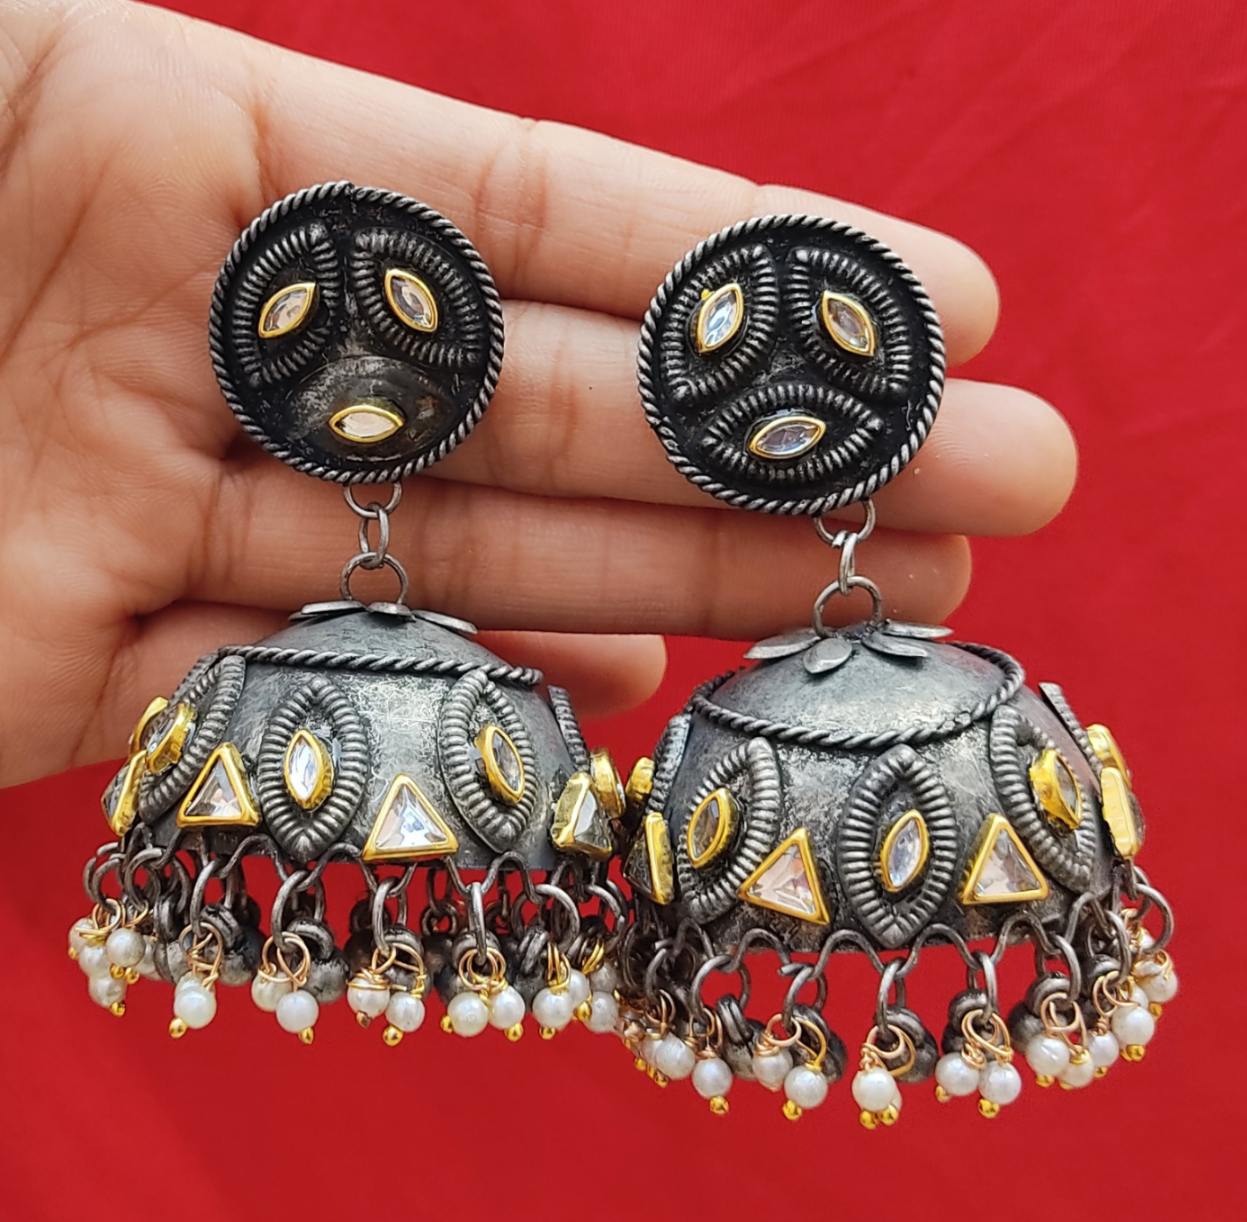 Black Polish Jhumka with Round Stud With Fancy stone Earrings for Women and Girls. - The Chikan Store